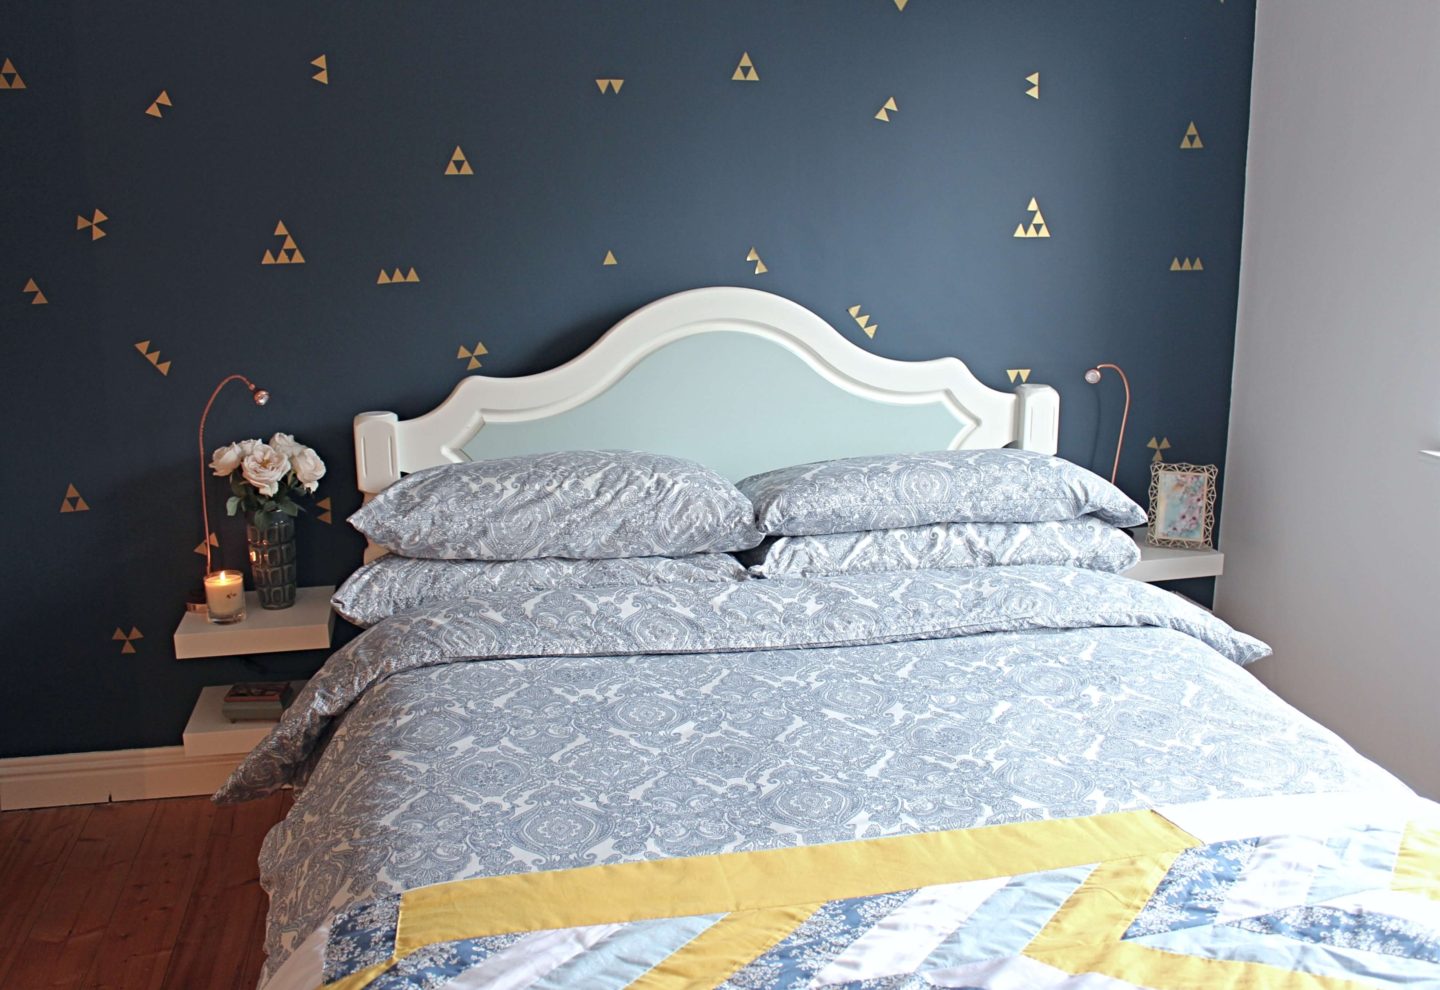 Bedroom with navy feature wall with gold triangular decals. 